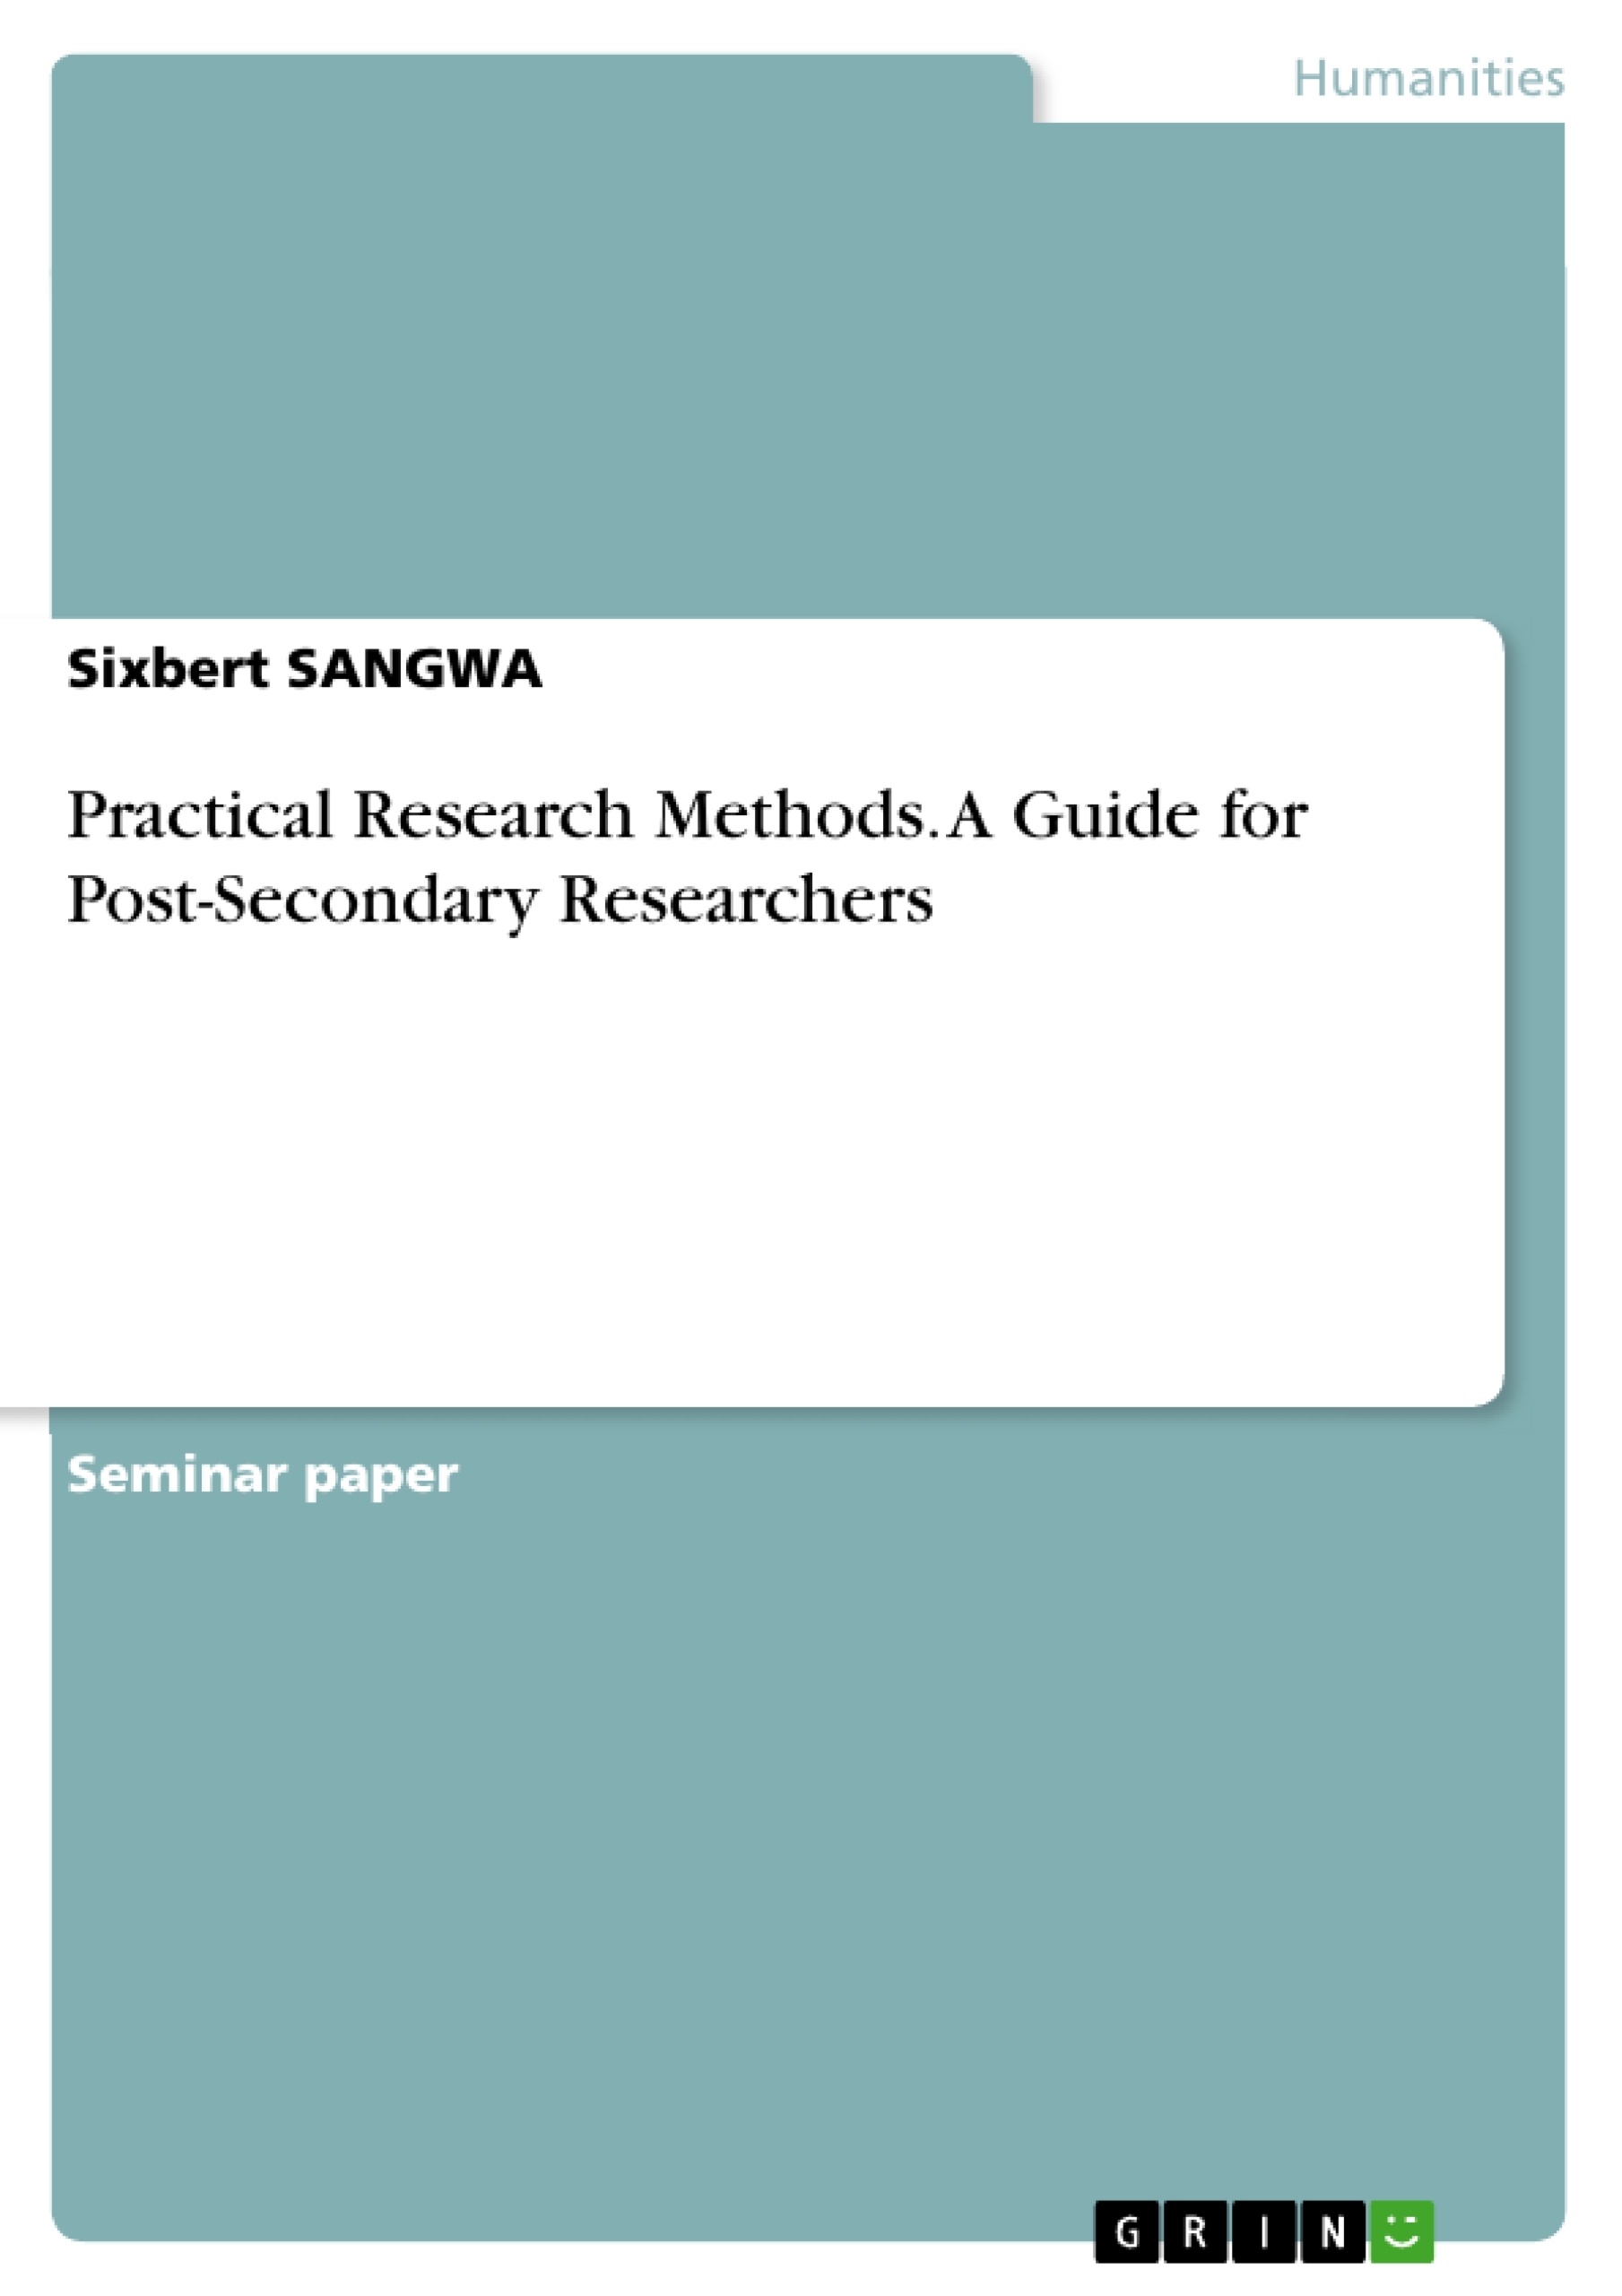 Title: Practical Research Methods. A Guide for Post-Secondary Researchers